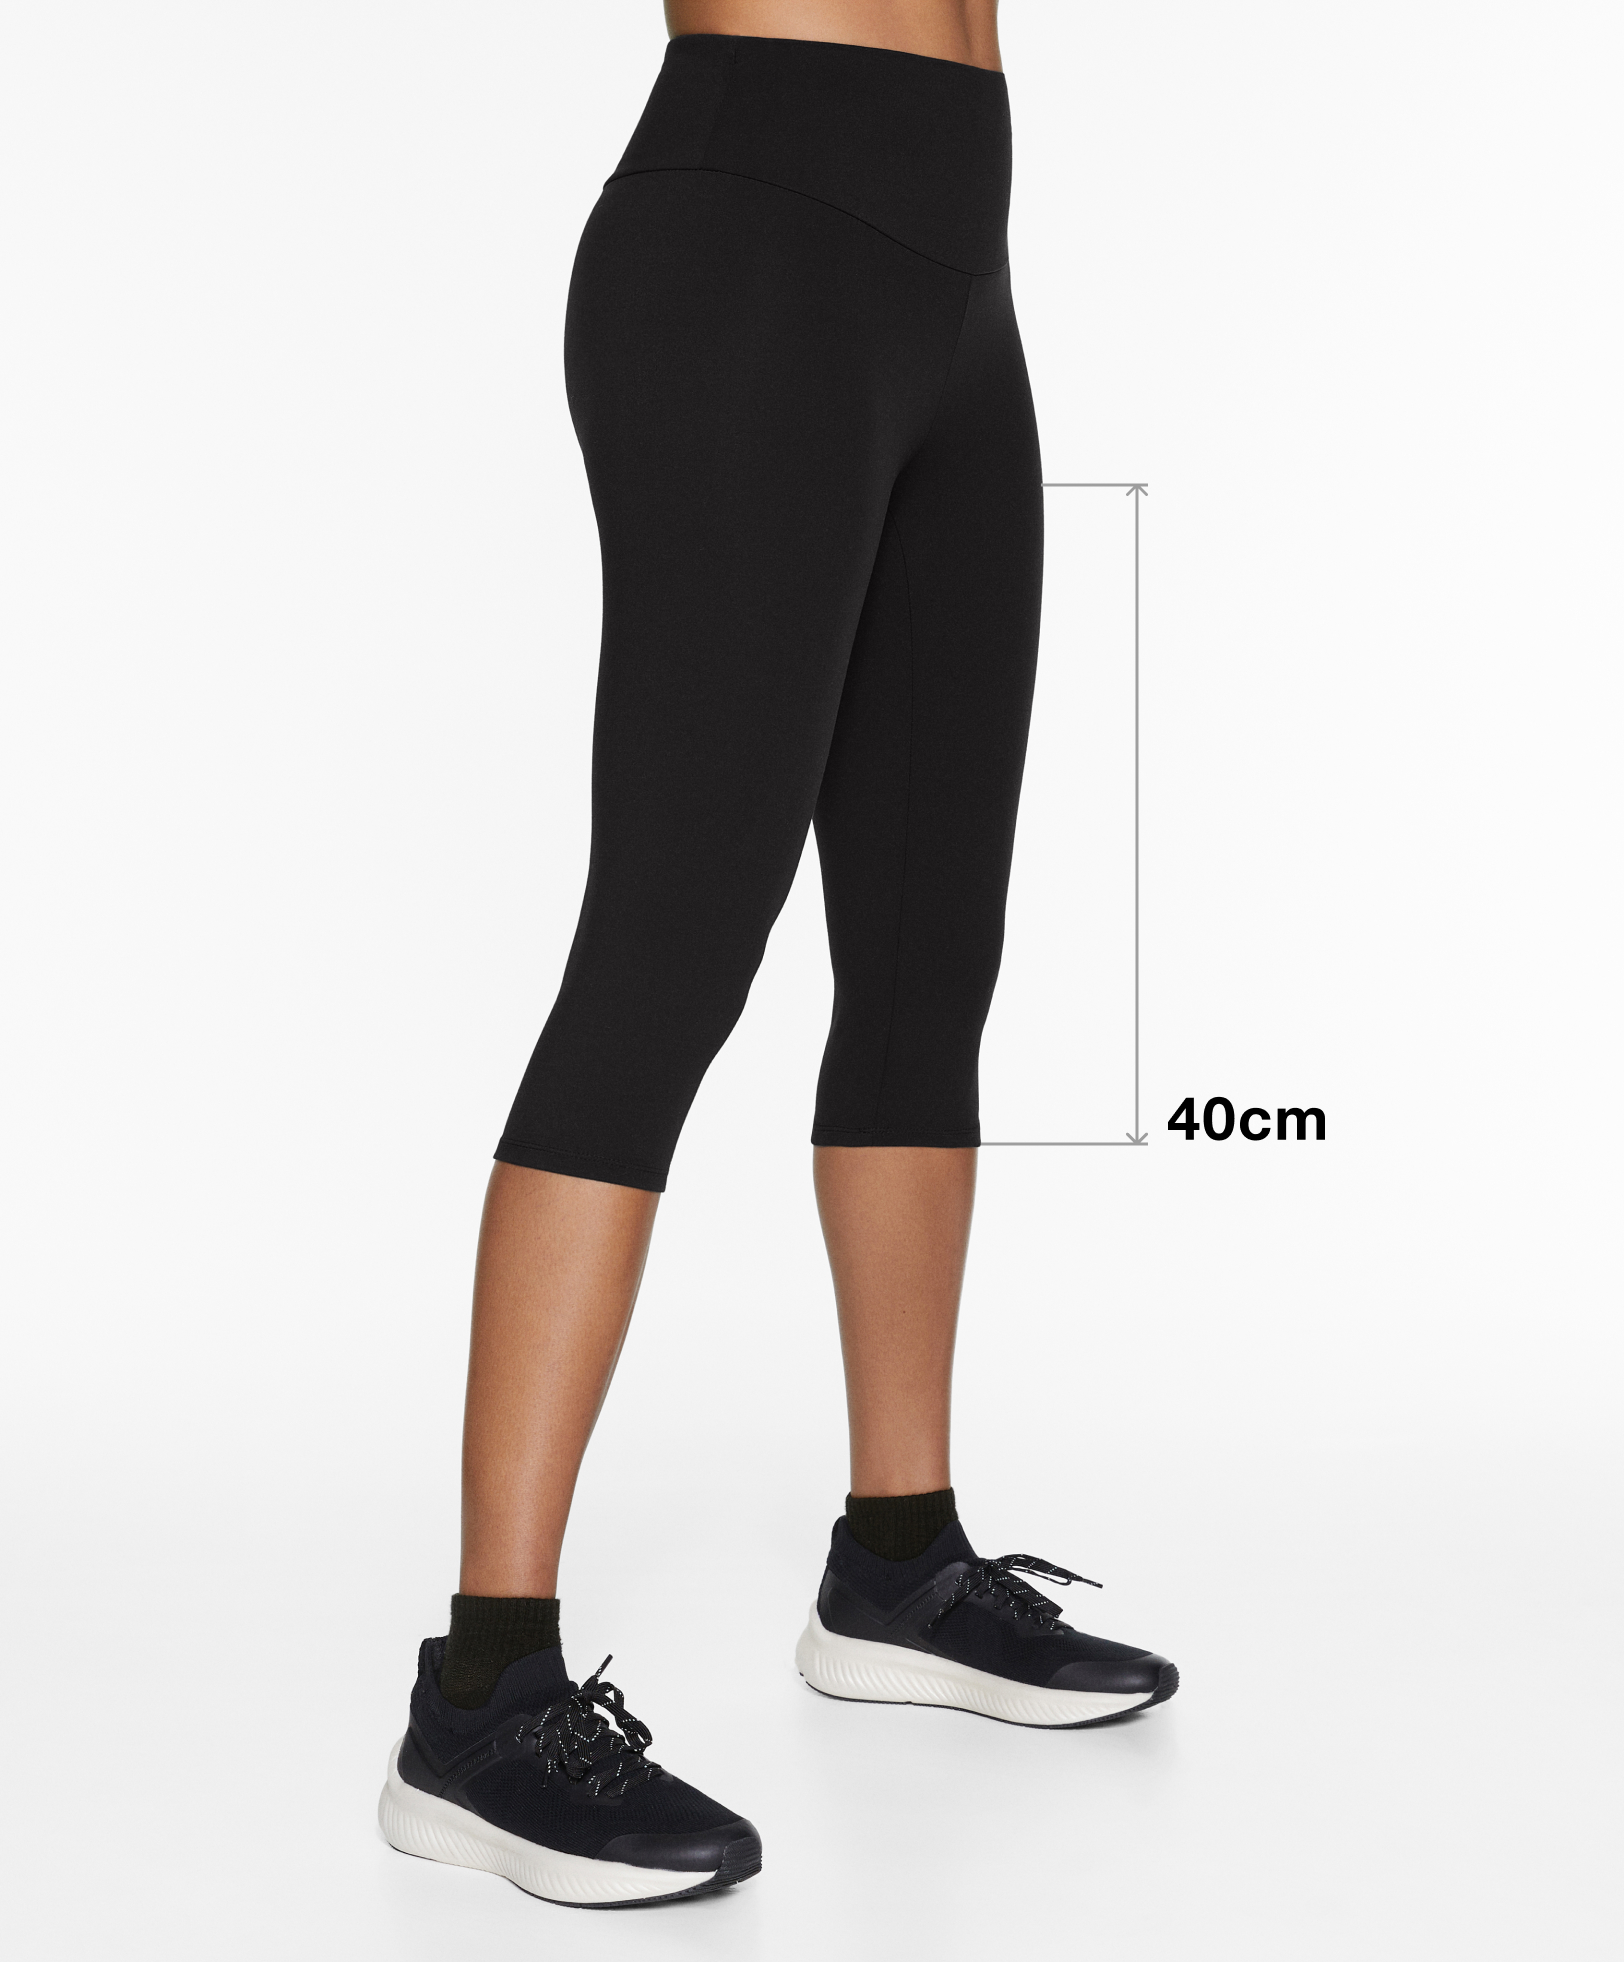 Comfortlux 65cm ankle-length leggings with pockets